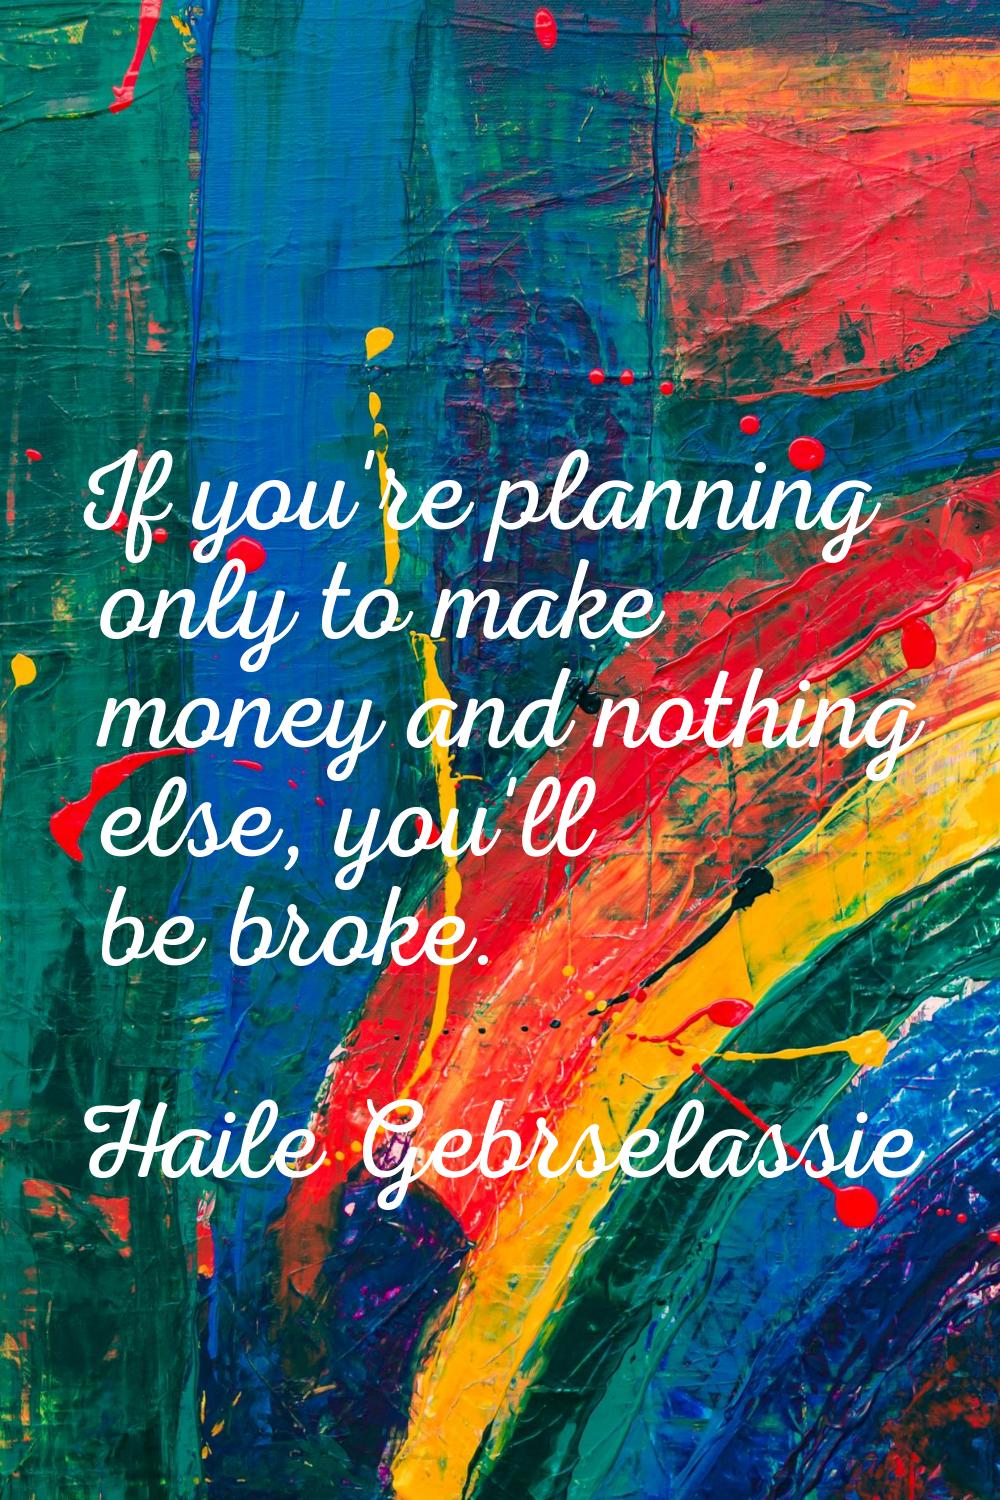 If you're planning only to make money and nothing else, you'll be broke.